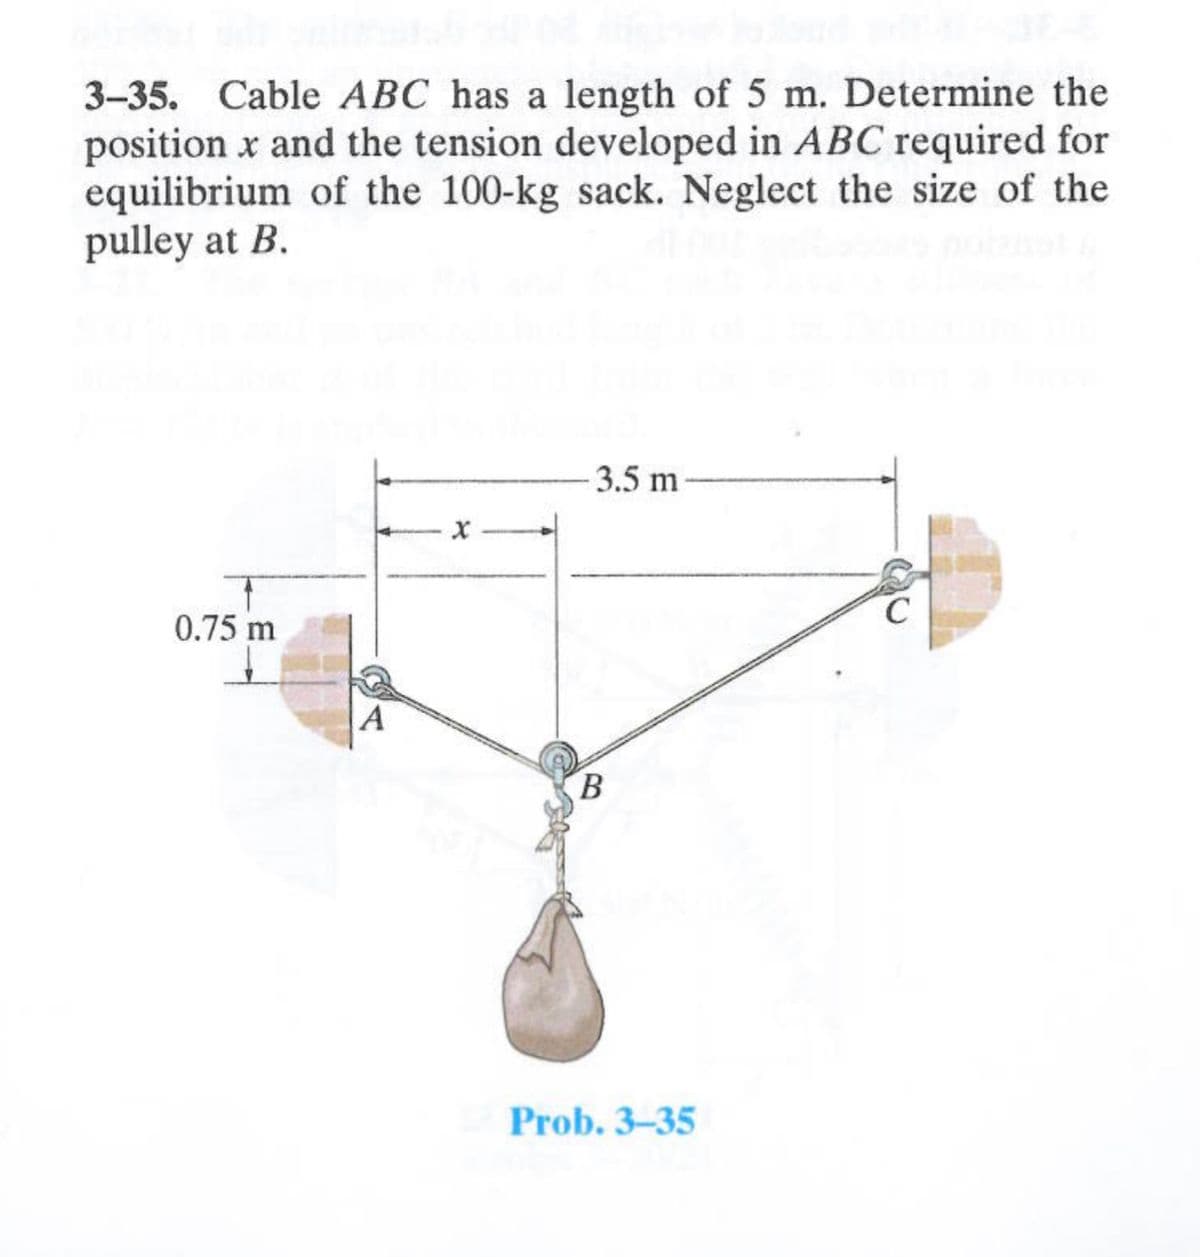 3-35. Cable ABC has a length of 5 m. Determine the
position x and the tension developed in ABC required for
equilibrium of the 100-kg sack. Neglect the size of the
pulley at B.
0.75 m
A
-3.5 m
B
Prob. 3-35
C